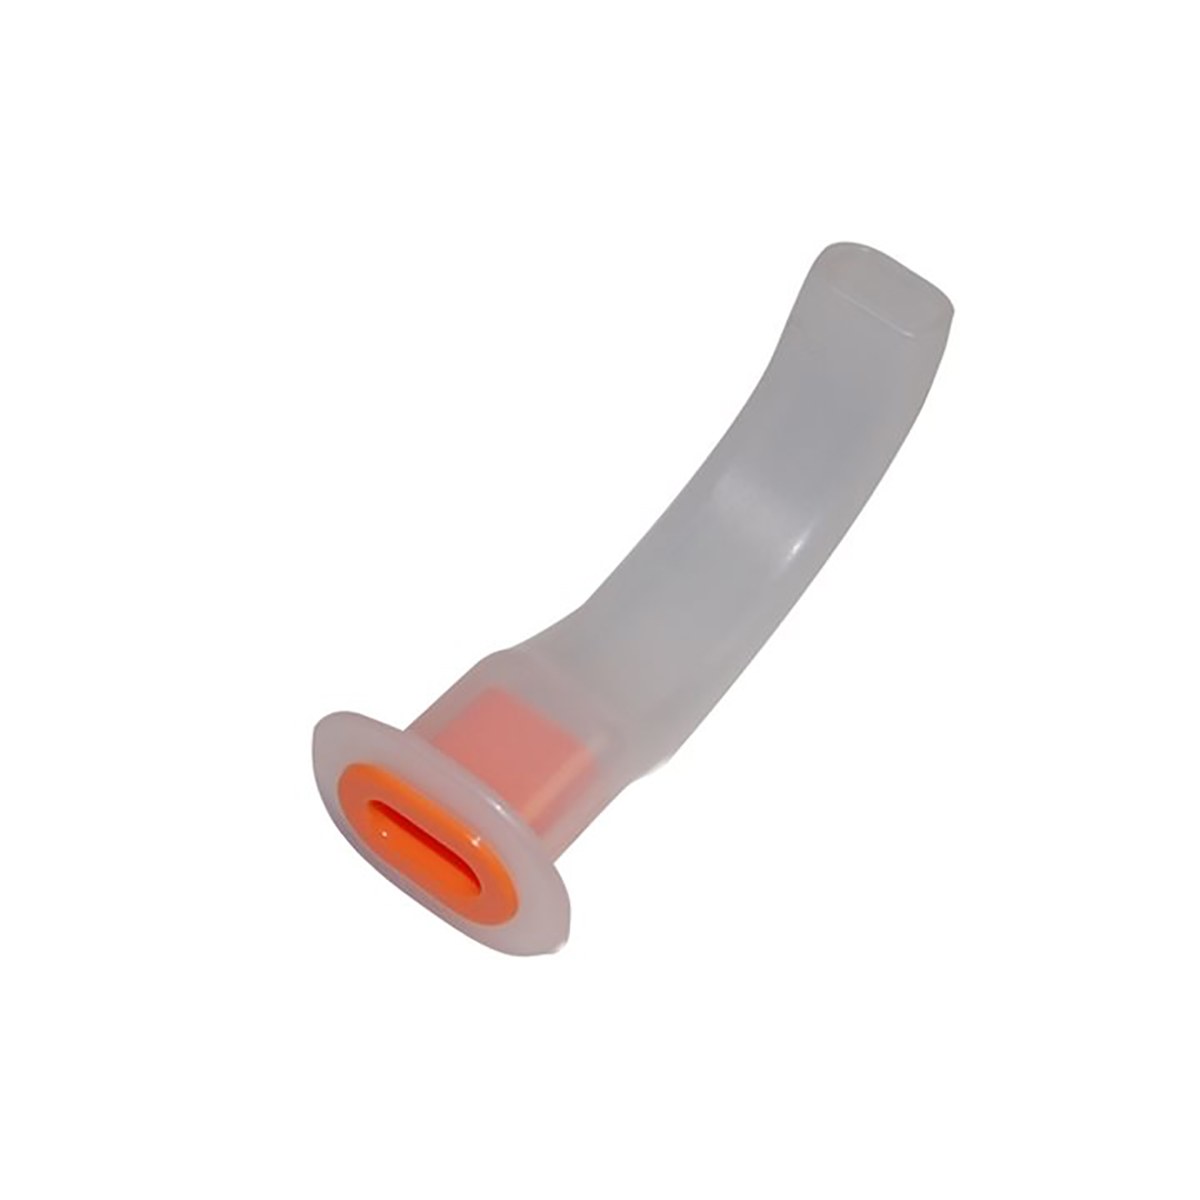 PROACT Size 3 Disposable Guedel Airway